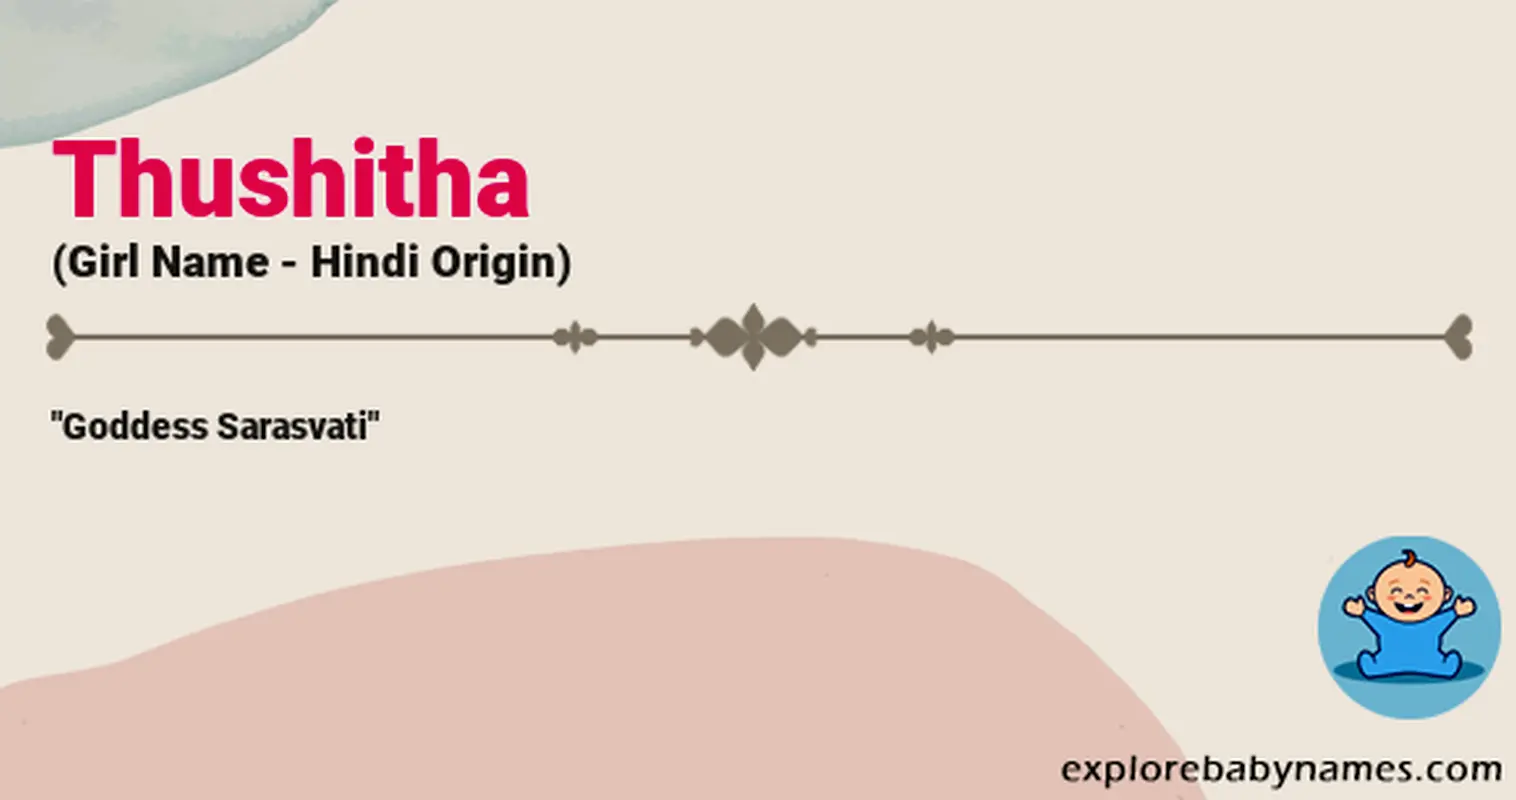 Meaning of Thushitha